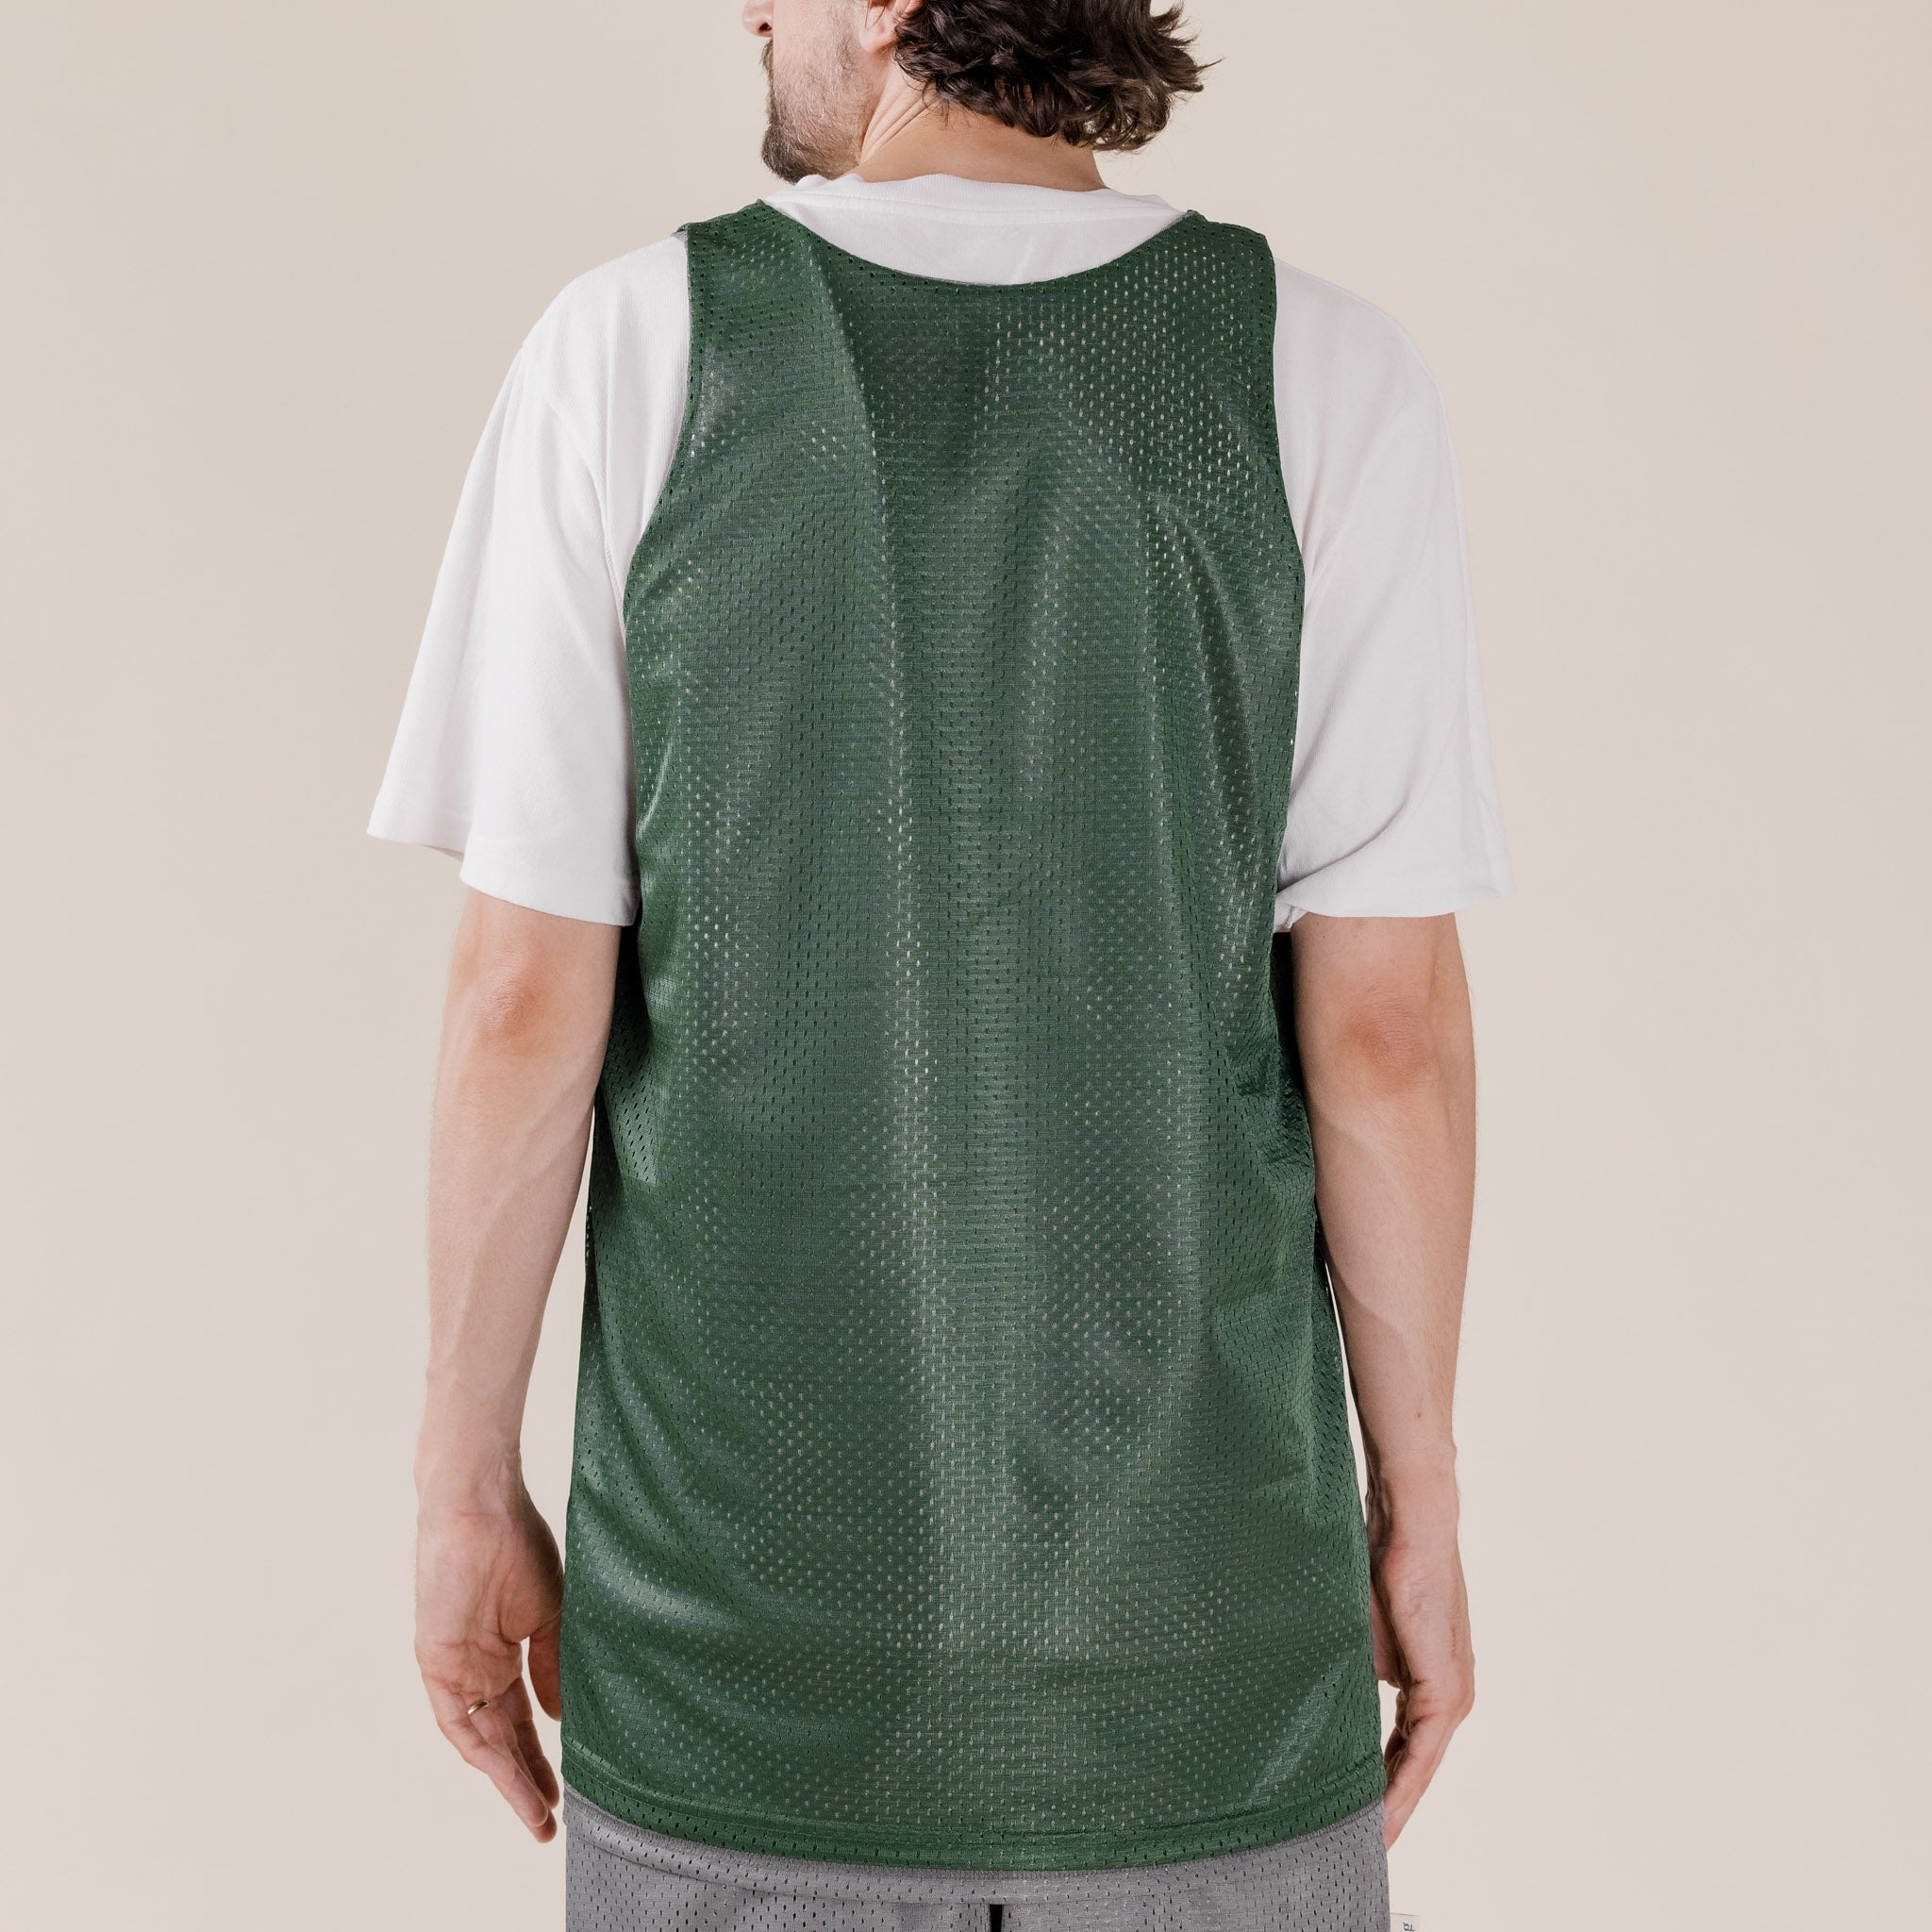 This Thing - Made in USA Reversible Mesh Vest - Athletic Grey / Forest Green